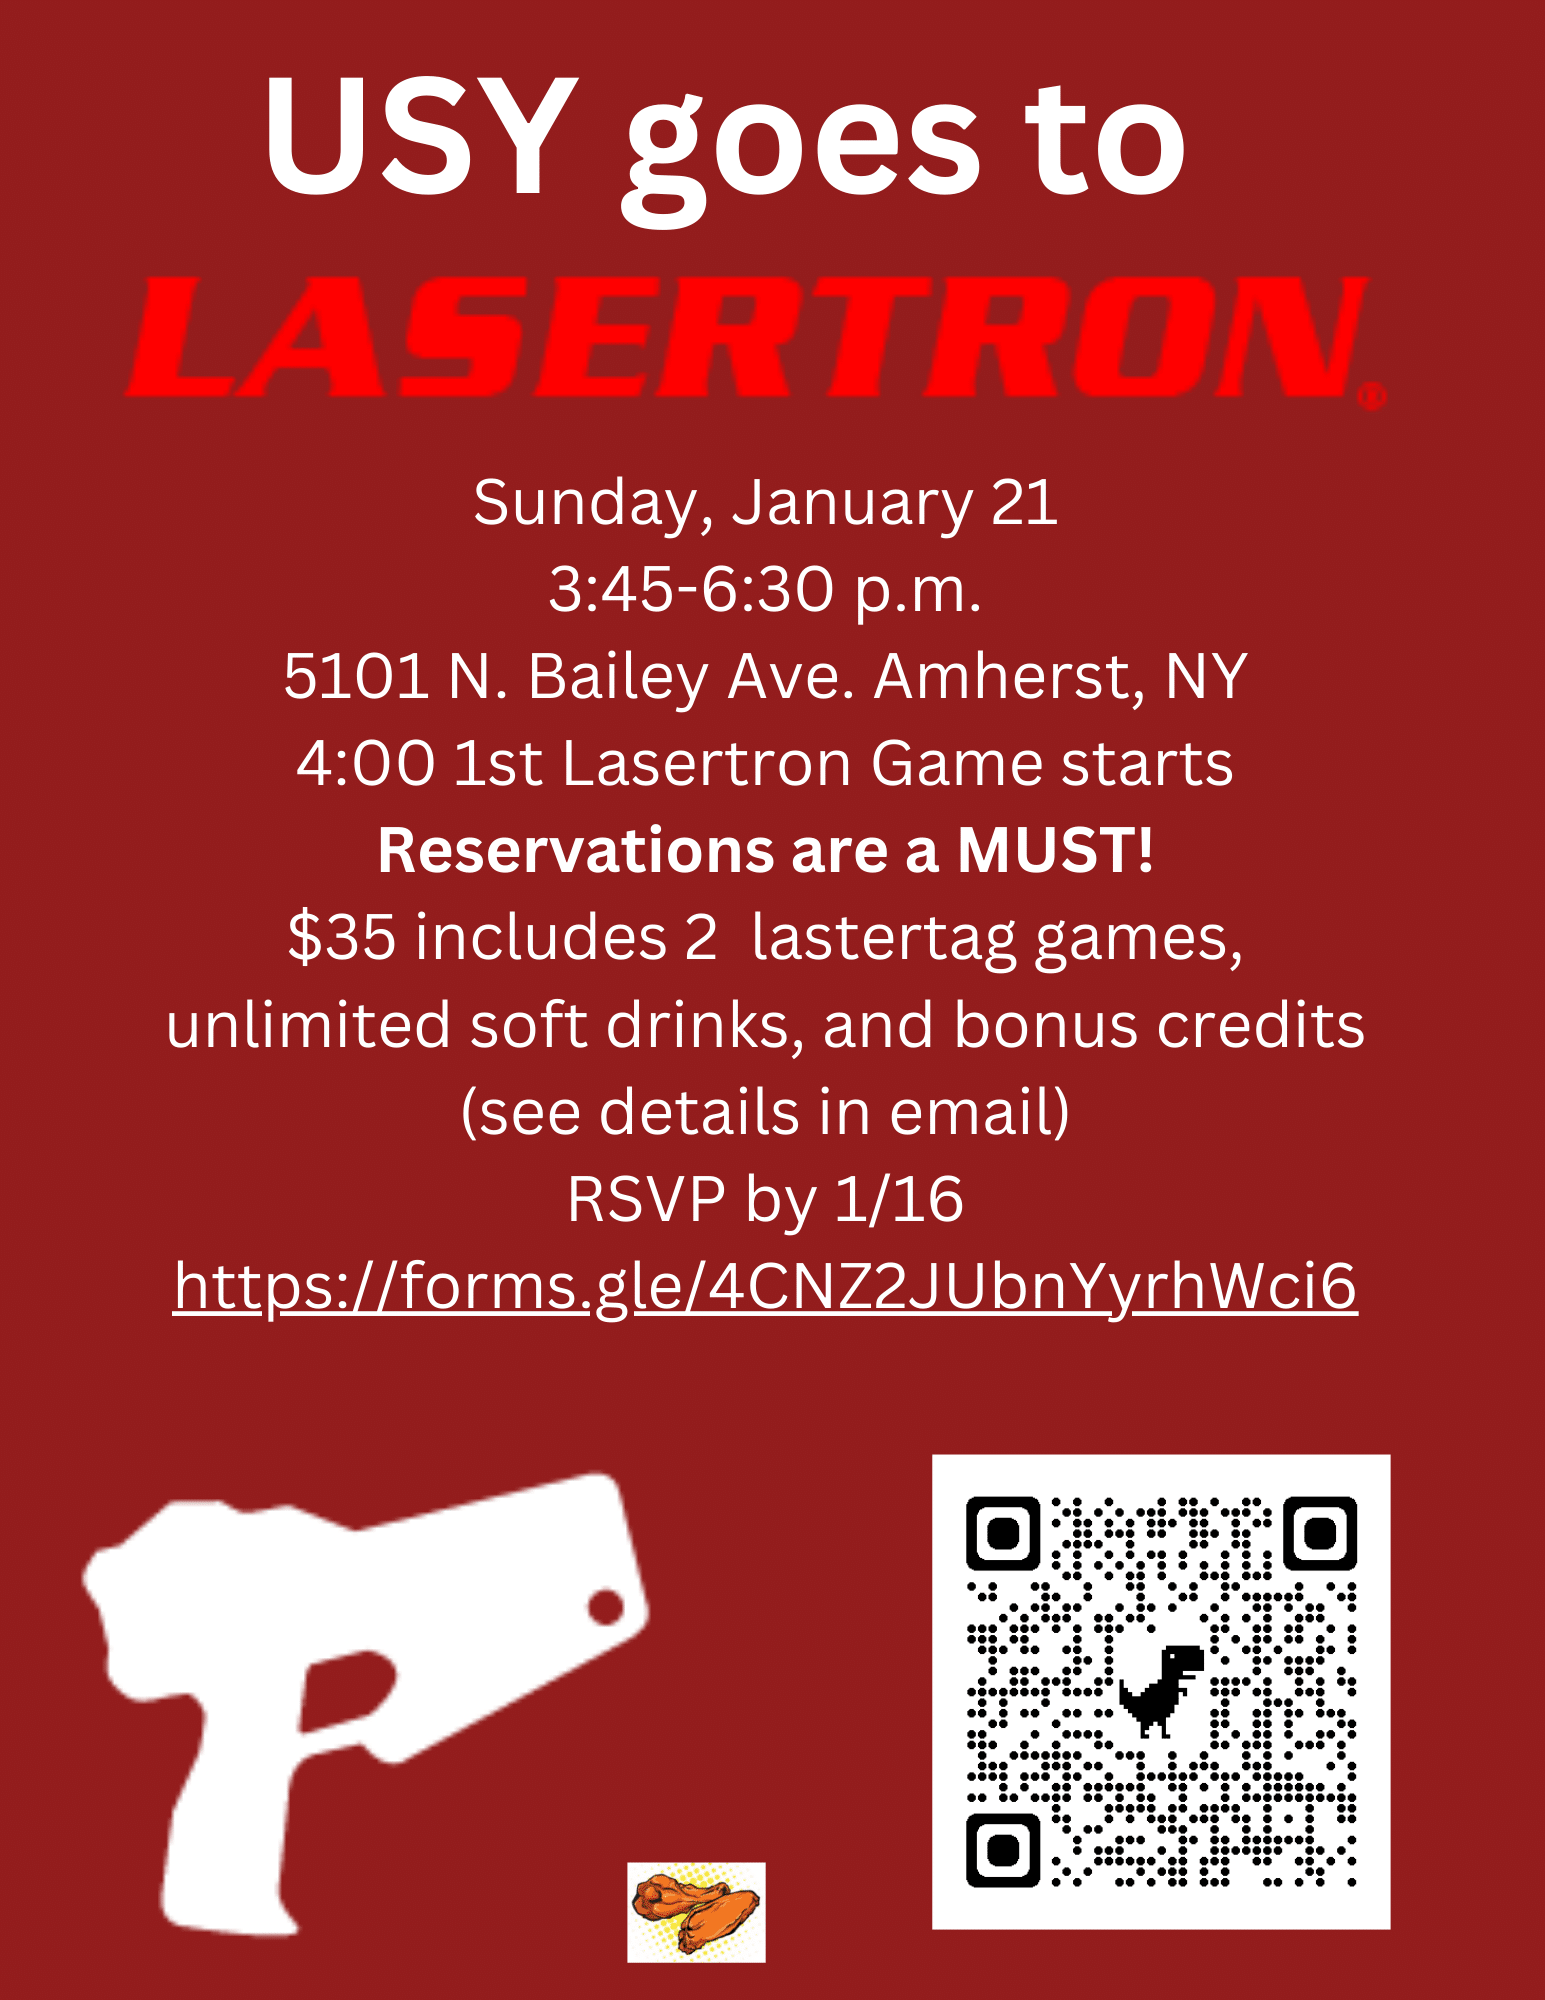 USY goes to Lasertron - lasertron outing